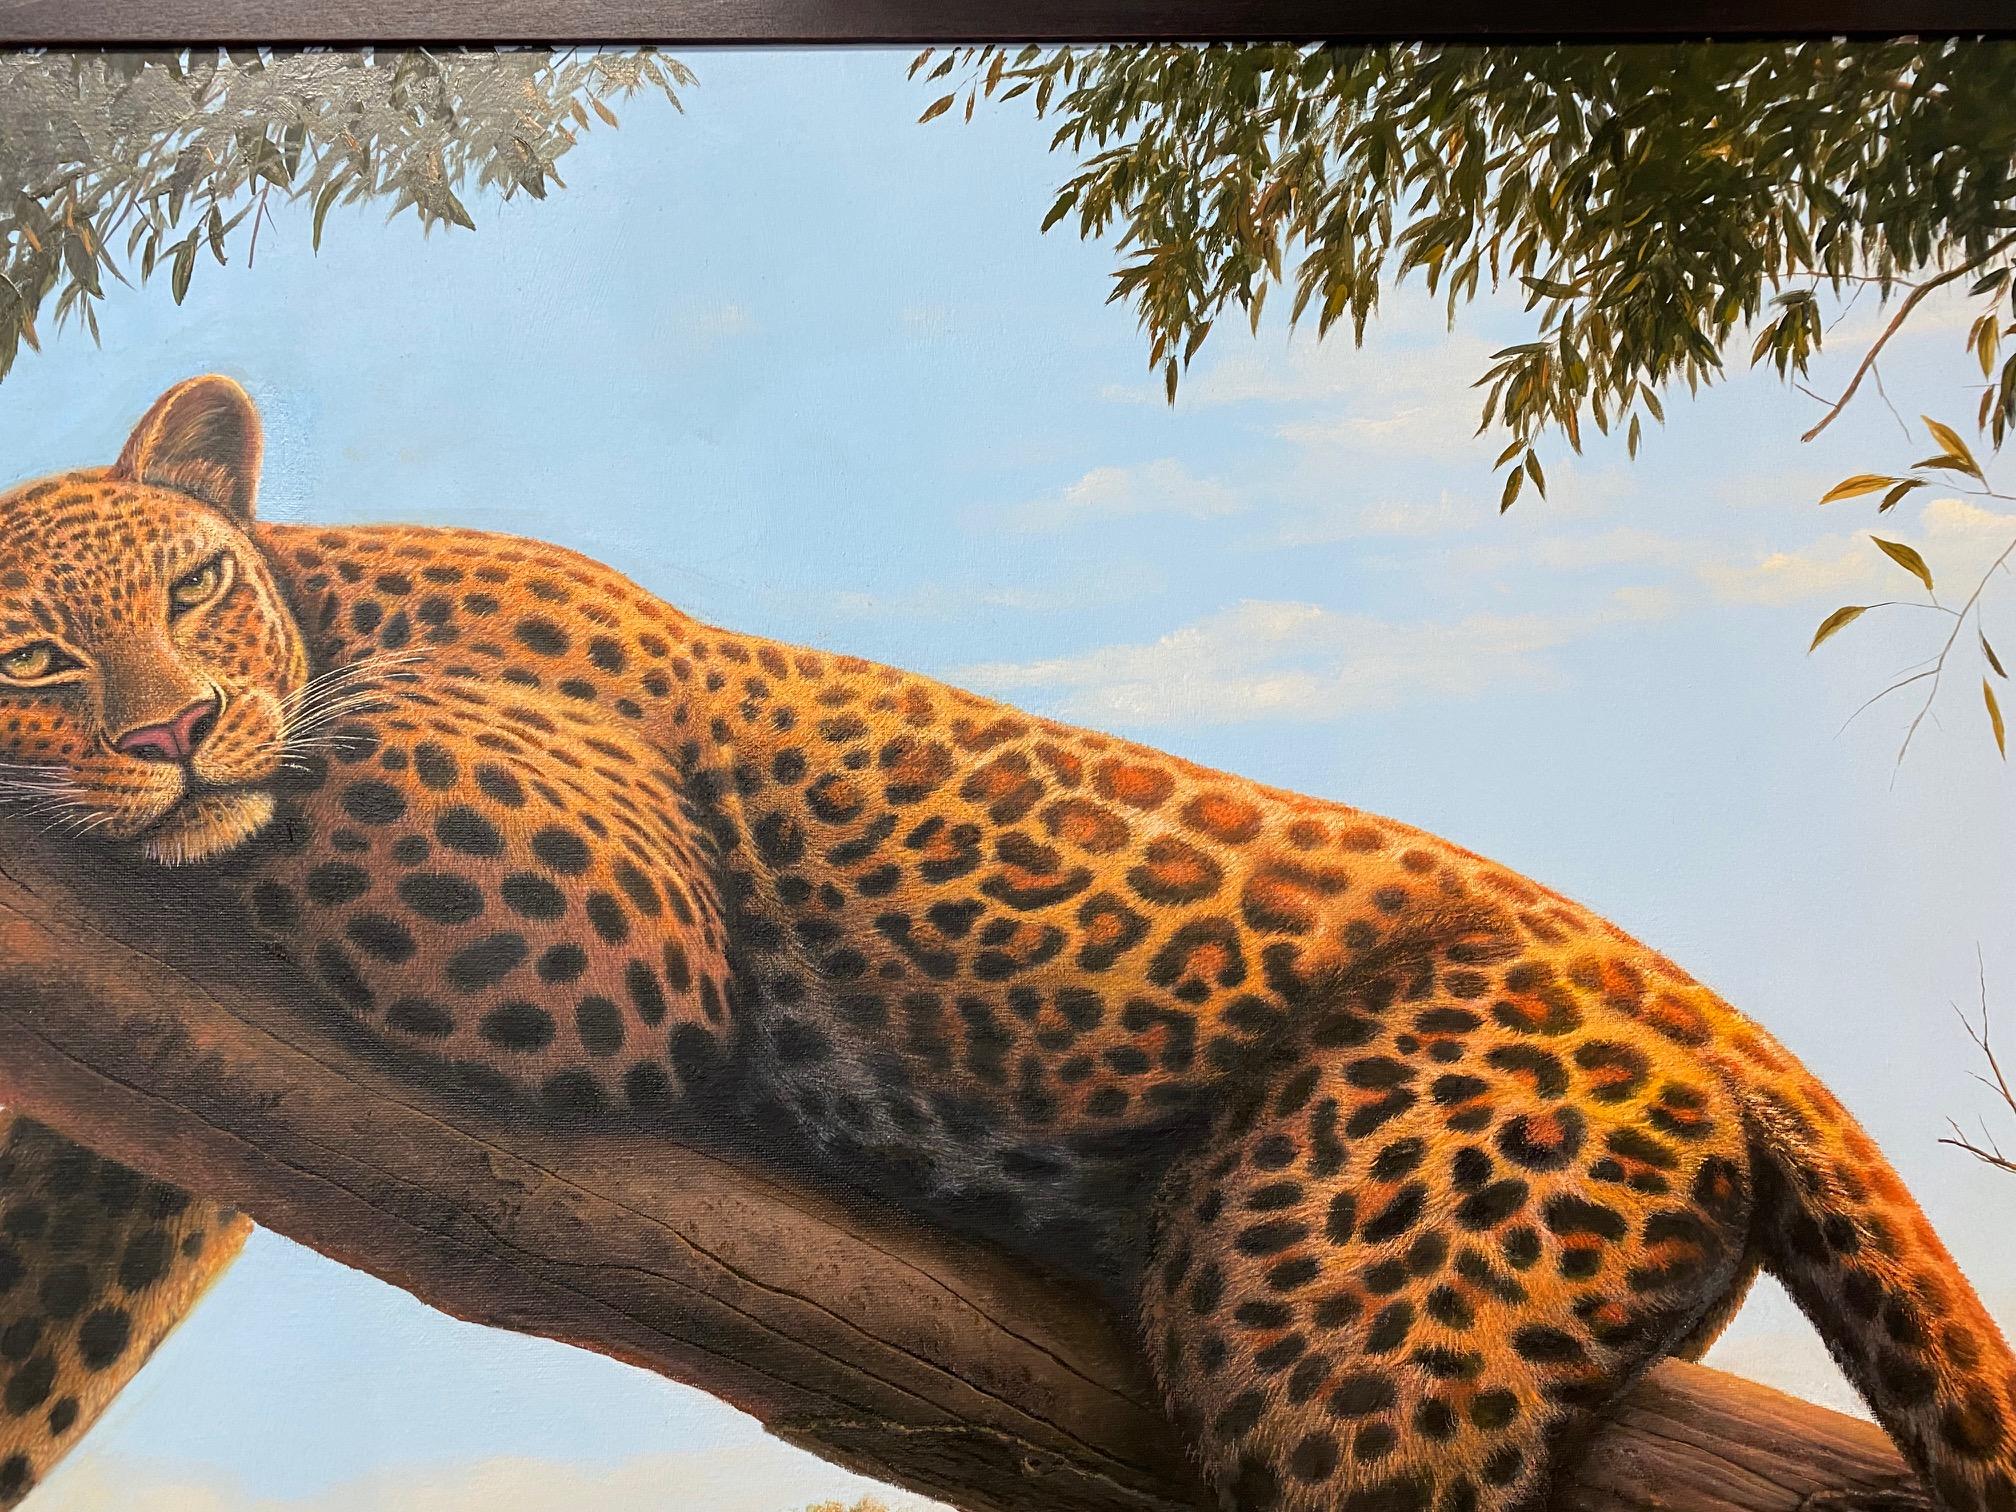 It's a lazy morning amidst the bucolic fauna of the jungle even still as the lingering mist lifts up from the meadow and begins to evaporate. The ferocious tiger in this realist figurative landscape is slow to rise but is at once agile and nearly